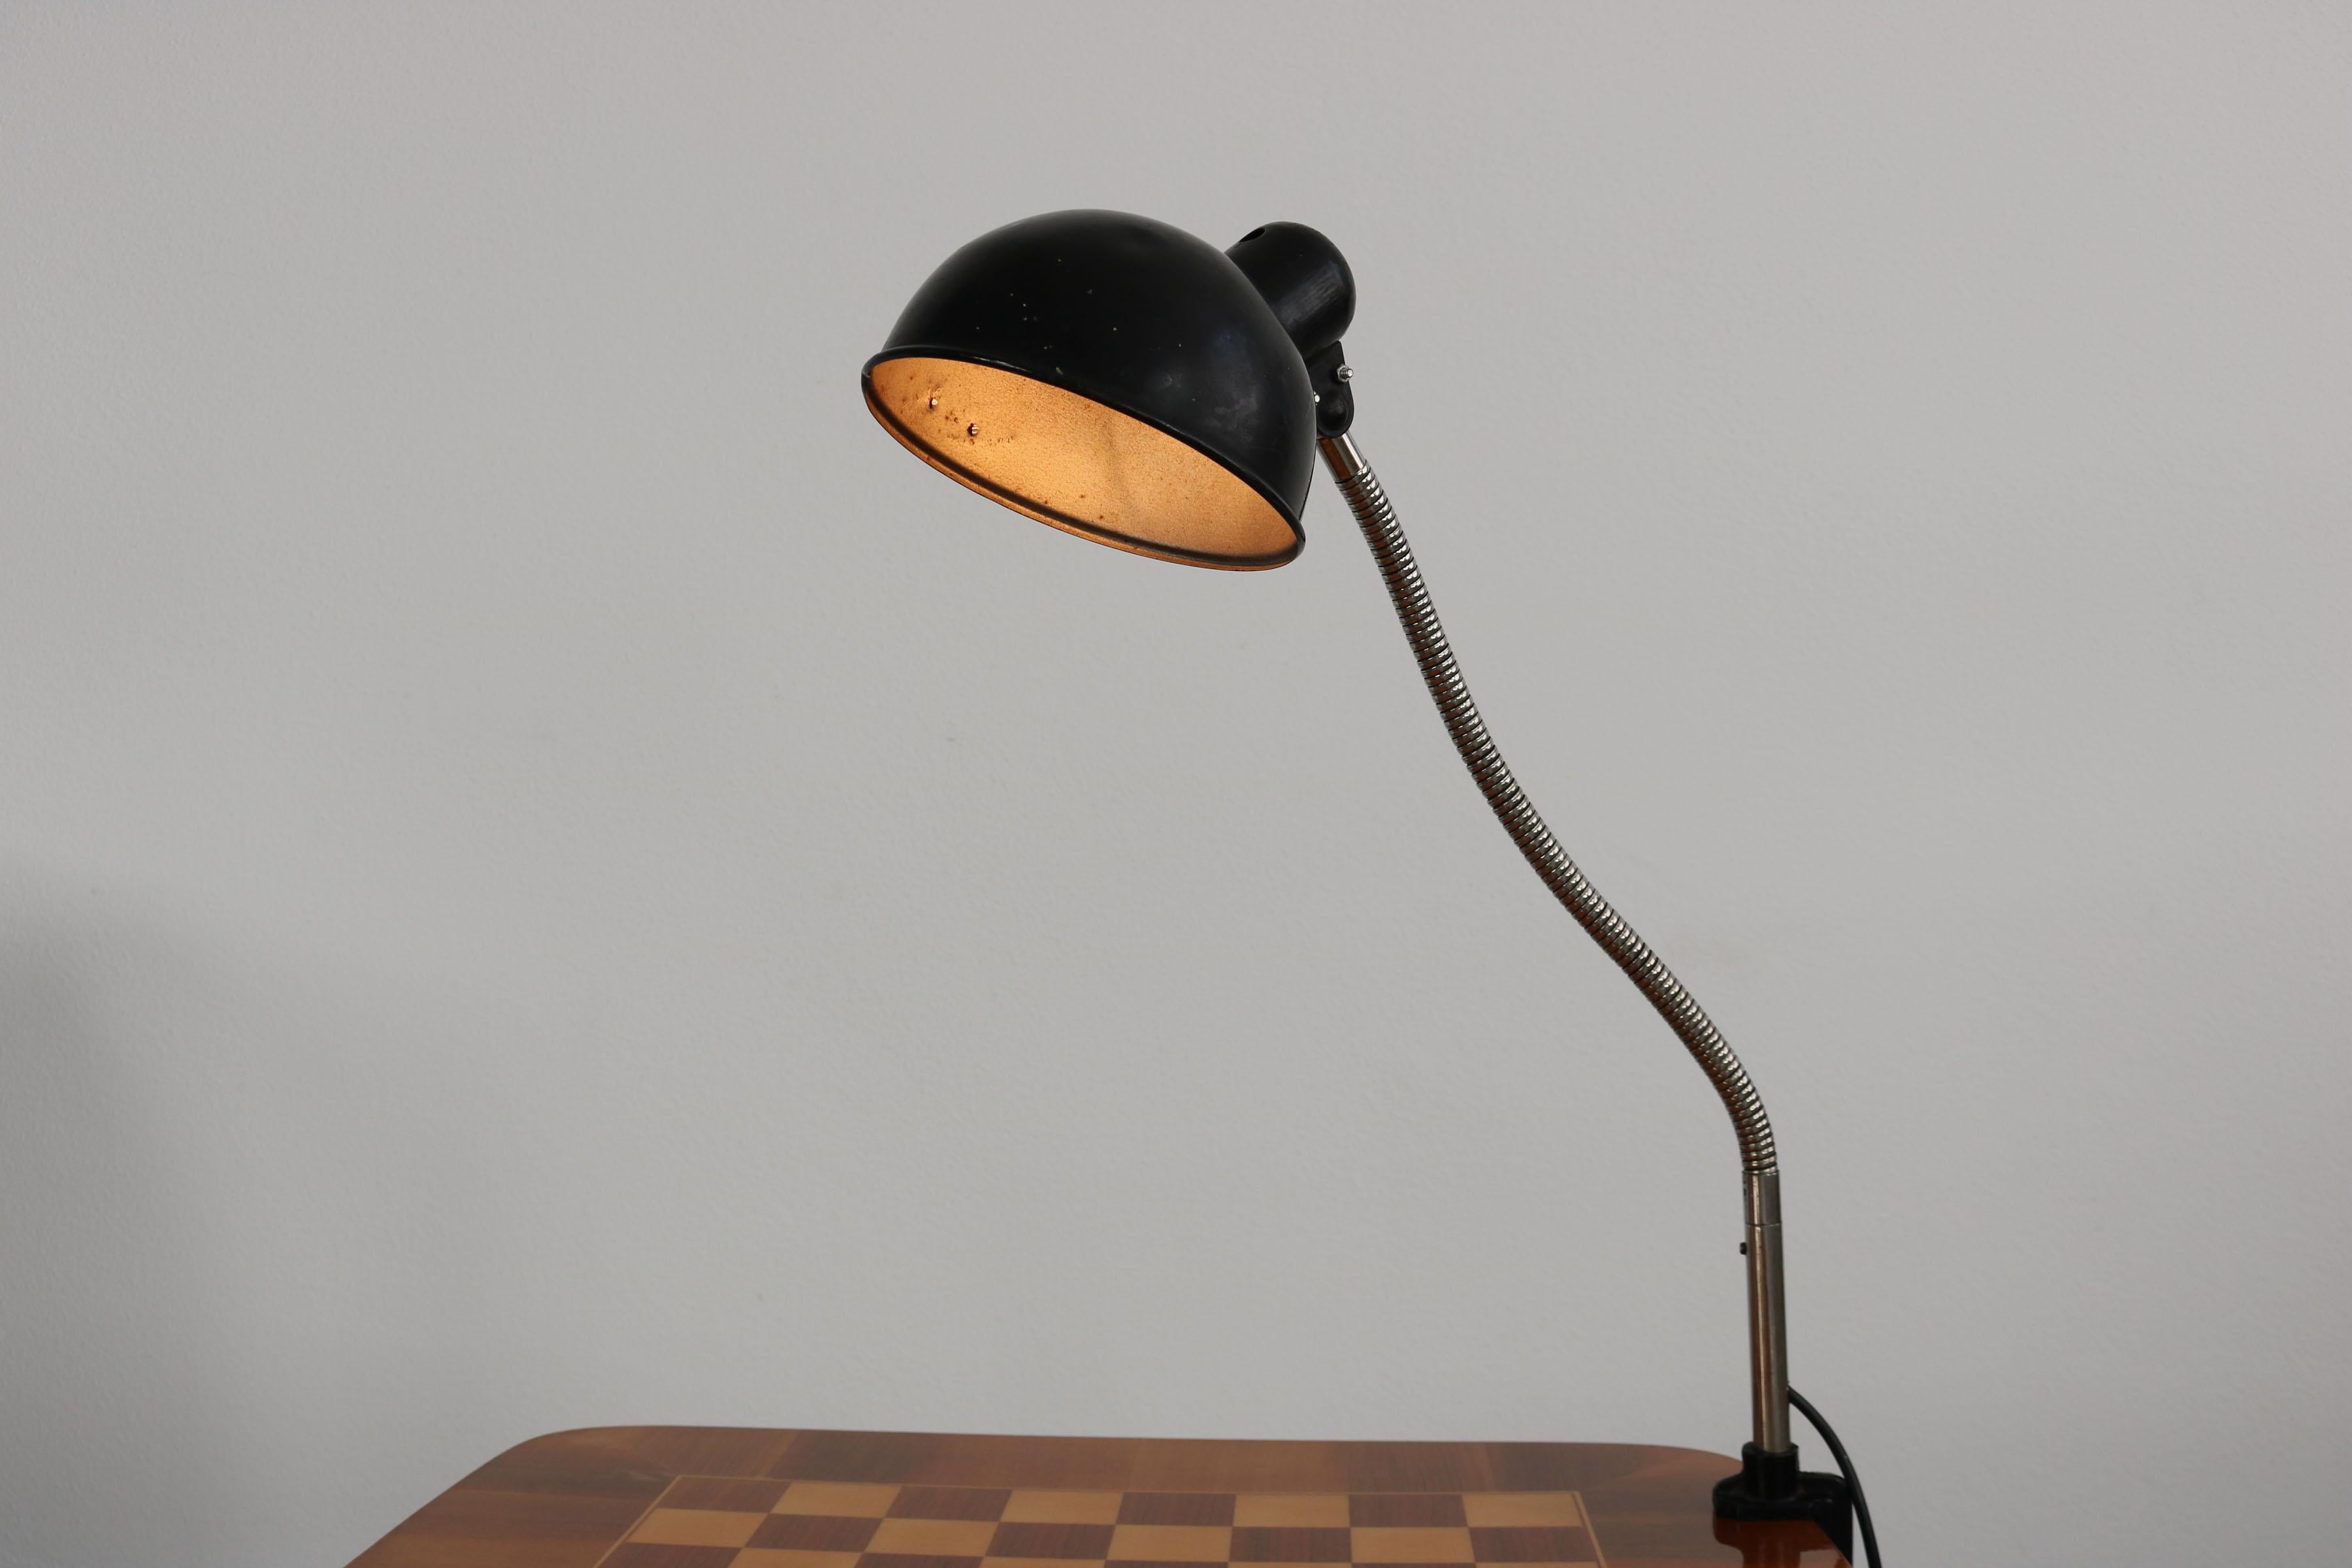 This Bauhaus lamp was designed by Christian Dell and manufactured by Kaiser Idell. It is made of lacquered aluminium and chrome-plated metal. The lamp is clamped directly to the table top. Condition: Patina due to age.